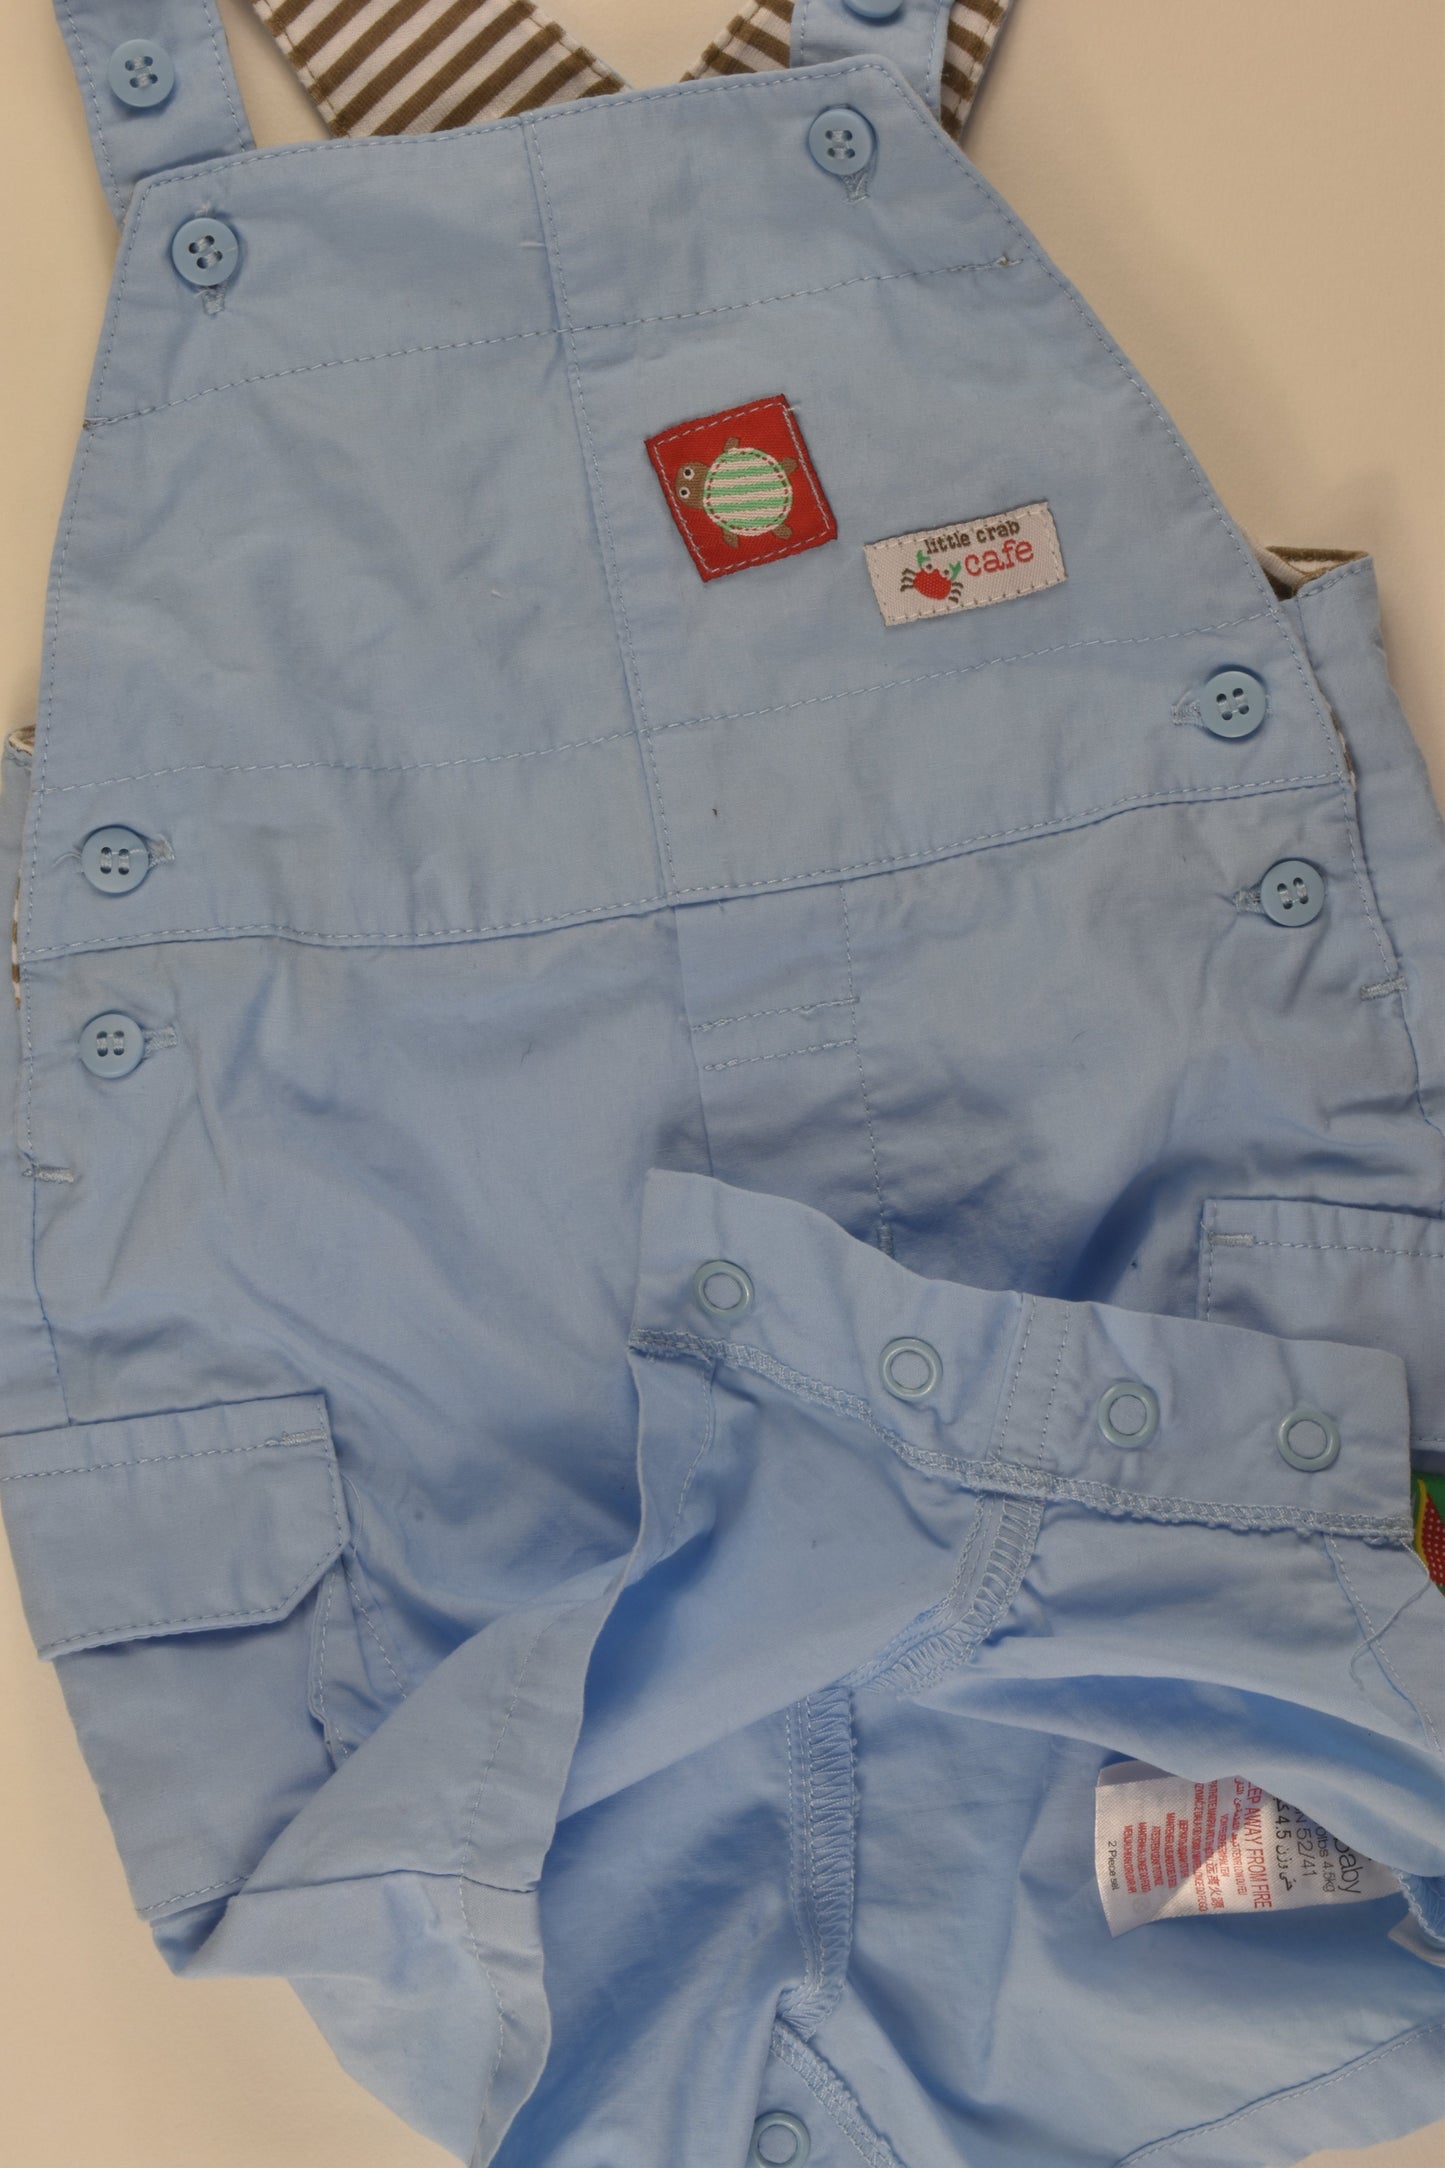 Mothercare Size 0000 Short Overalls